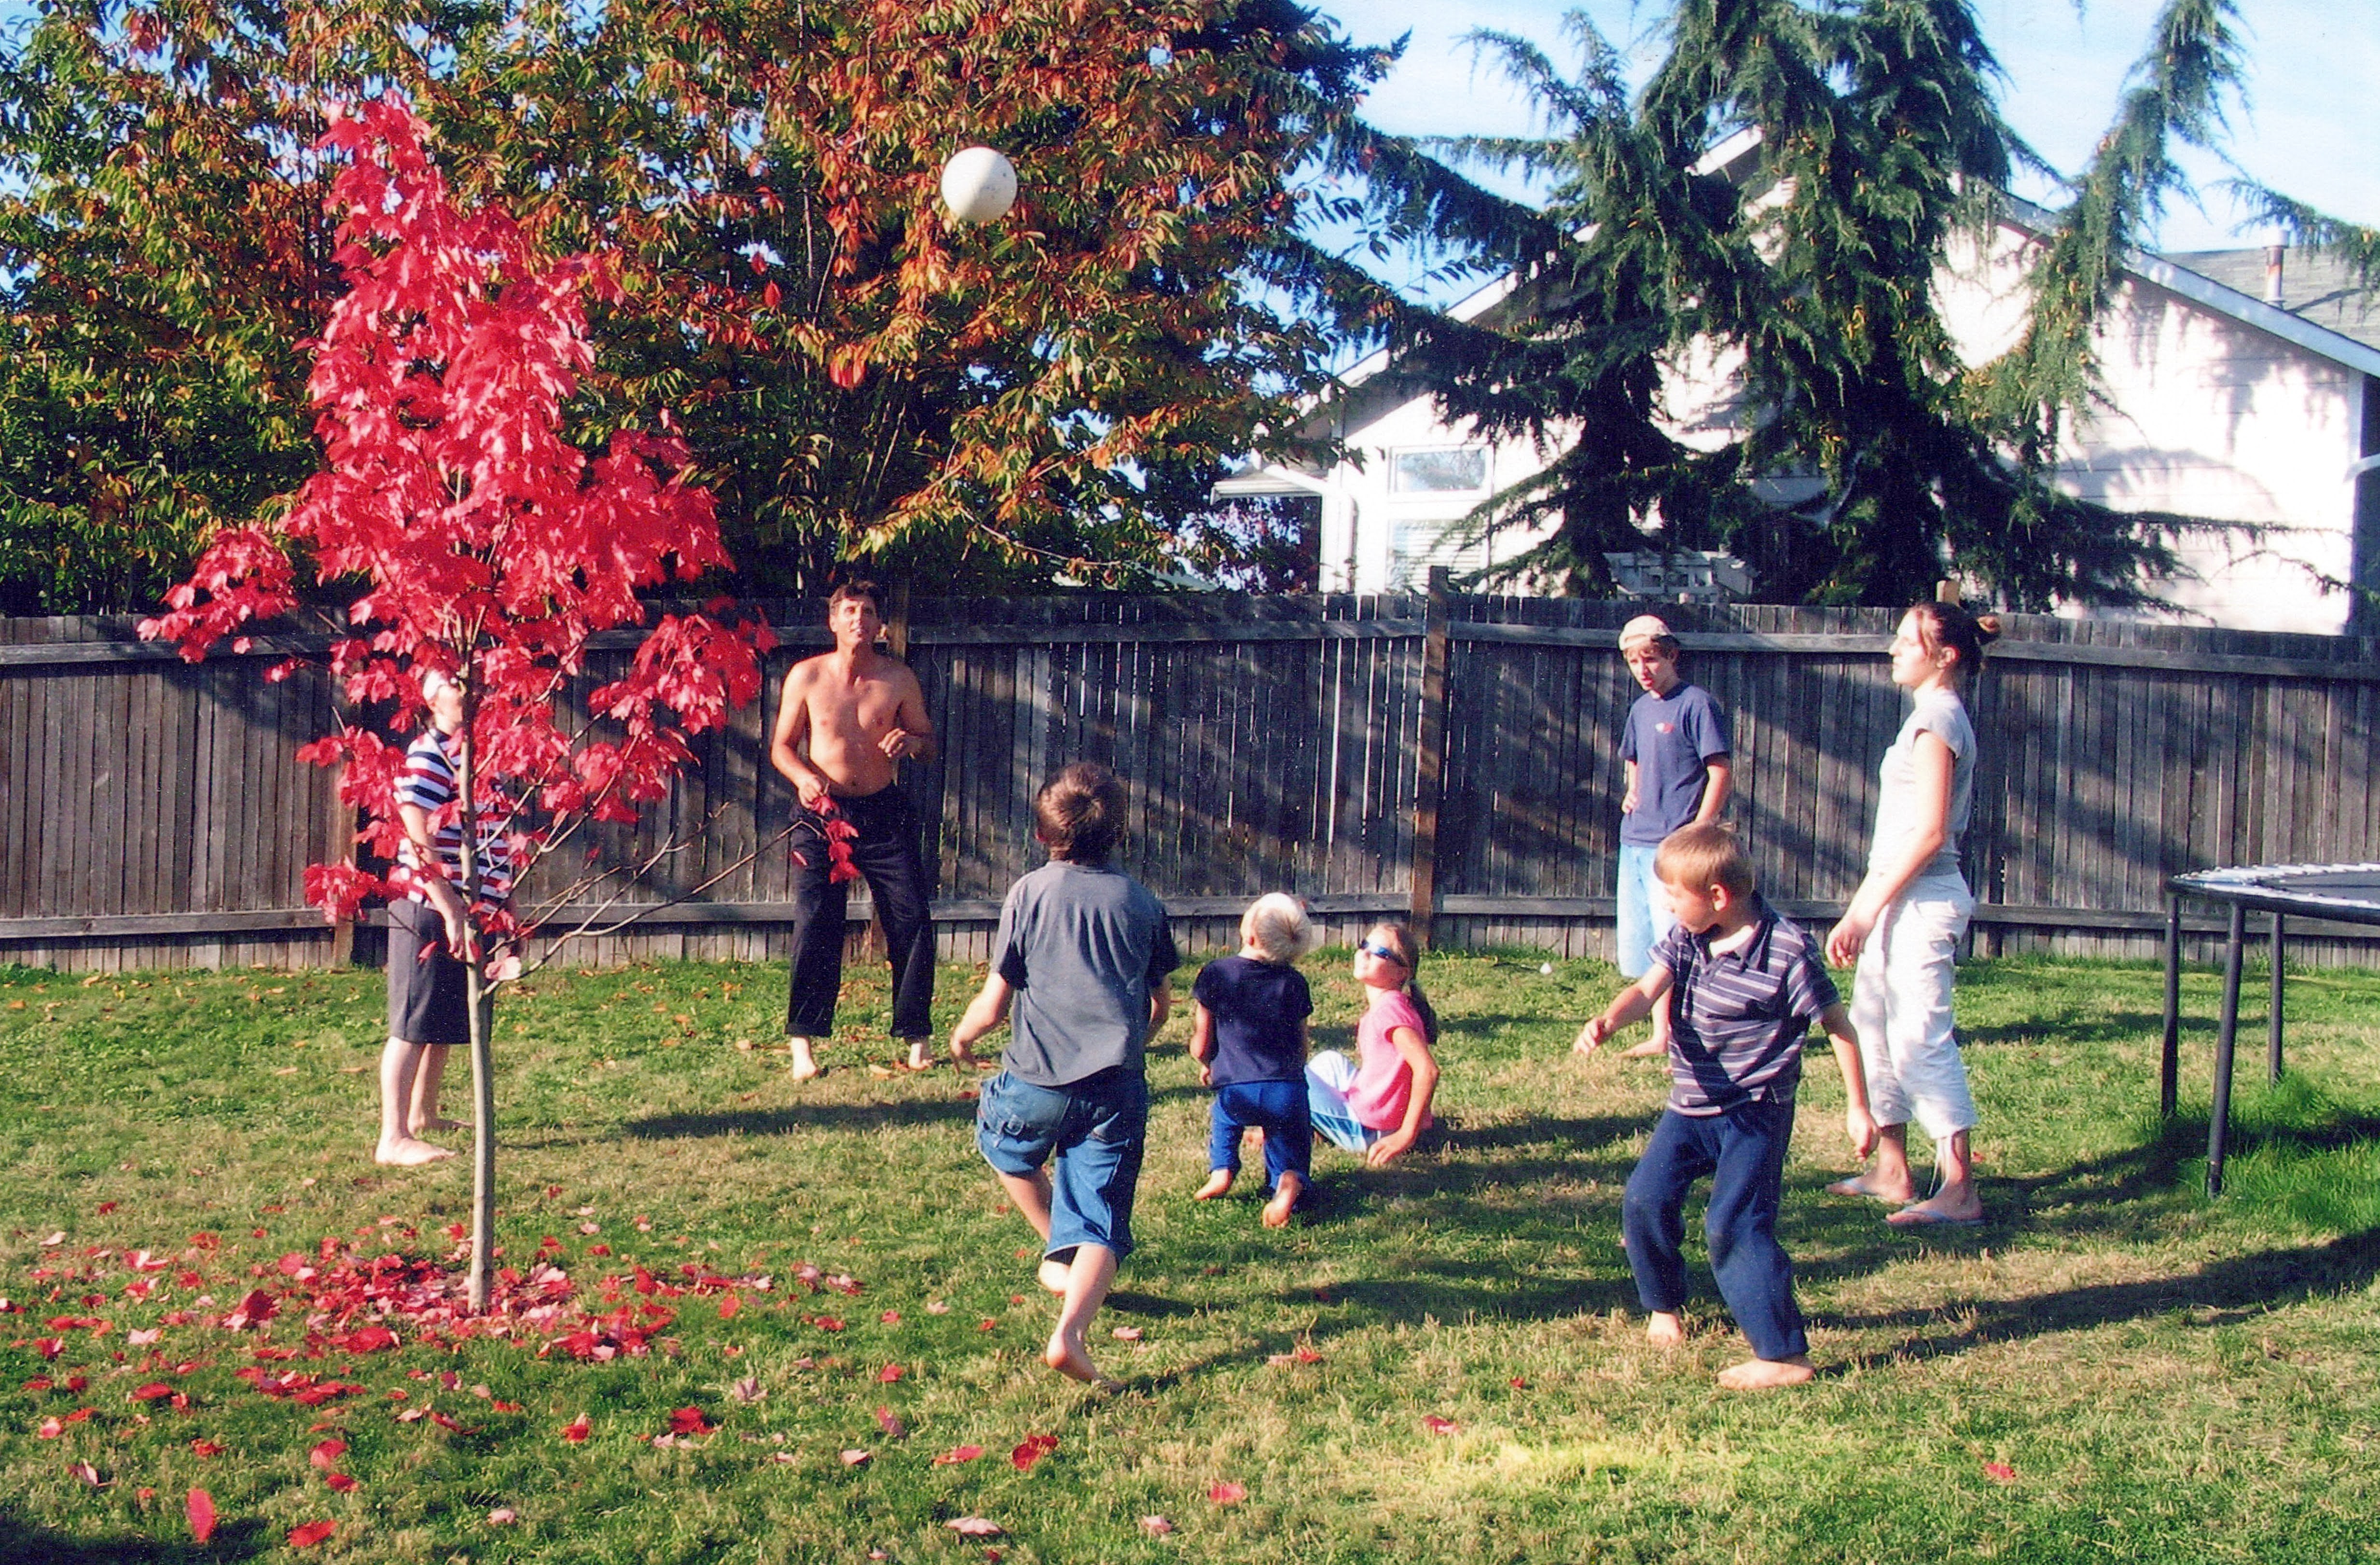 This is a picture of my parents and us siblings playing volleyball in our backyard. I’m the one sitting in the middle in pink, with glasses on. This picture was from Fall 2006. I was 9.